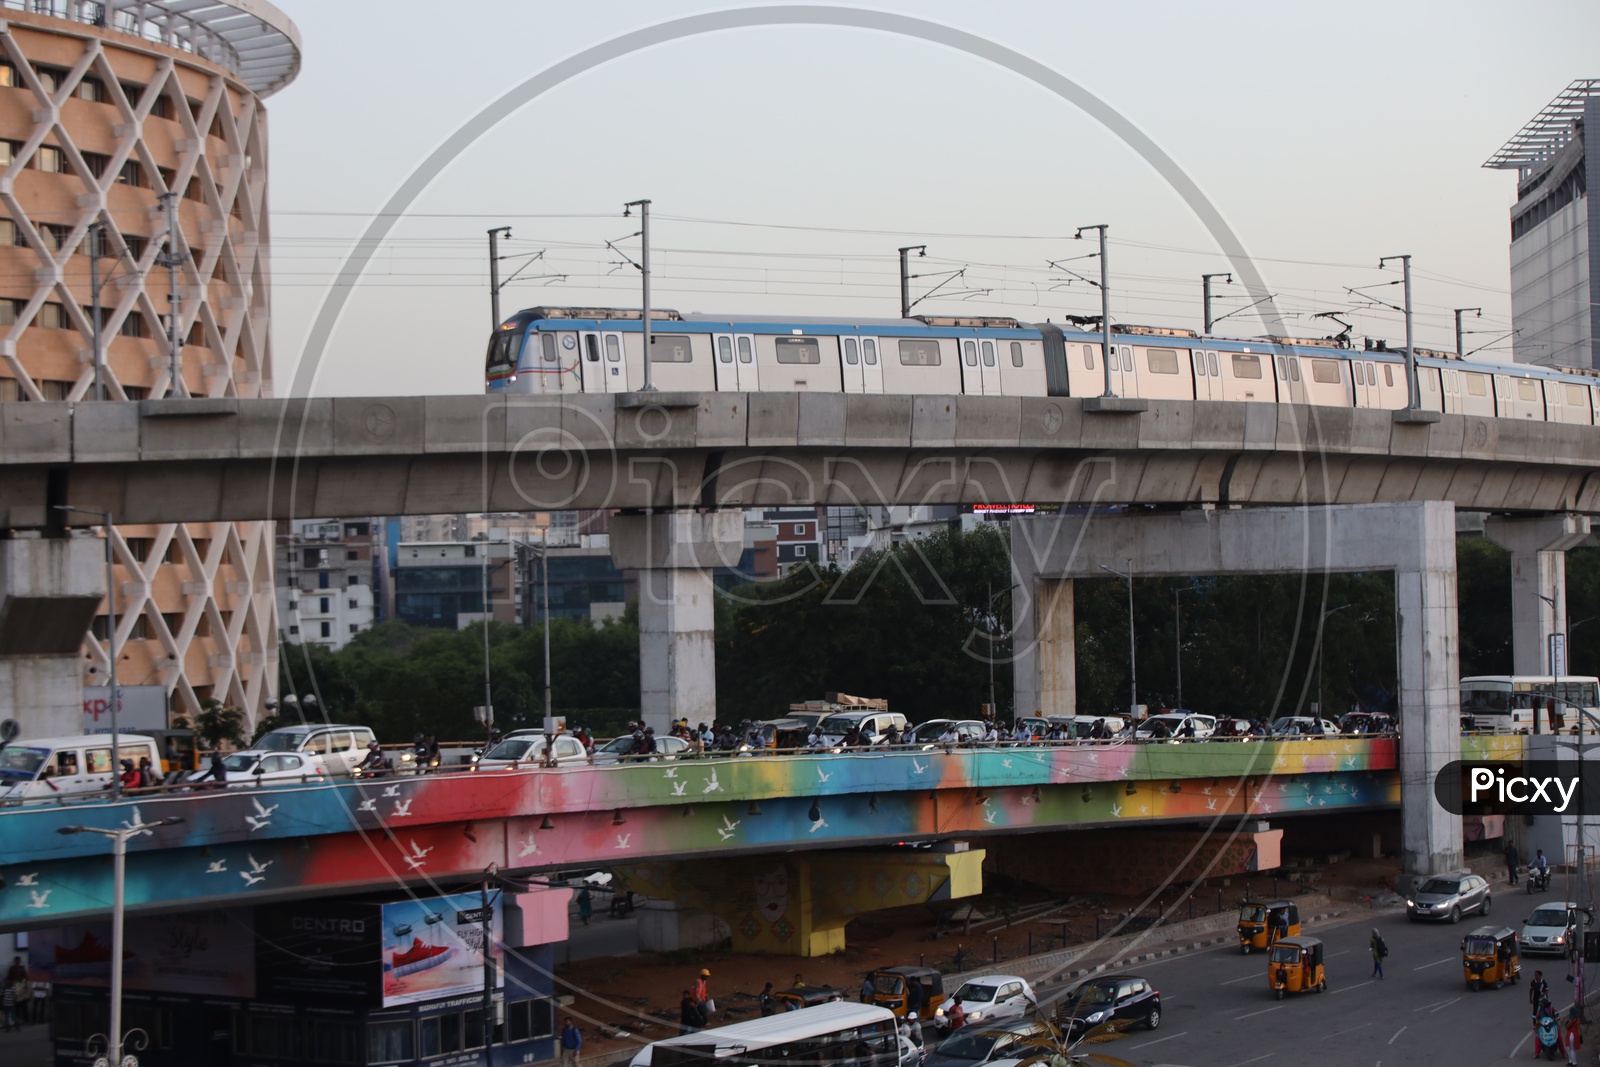 Metro Train Running on Track With Hitech City Flyover Composition